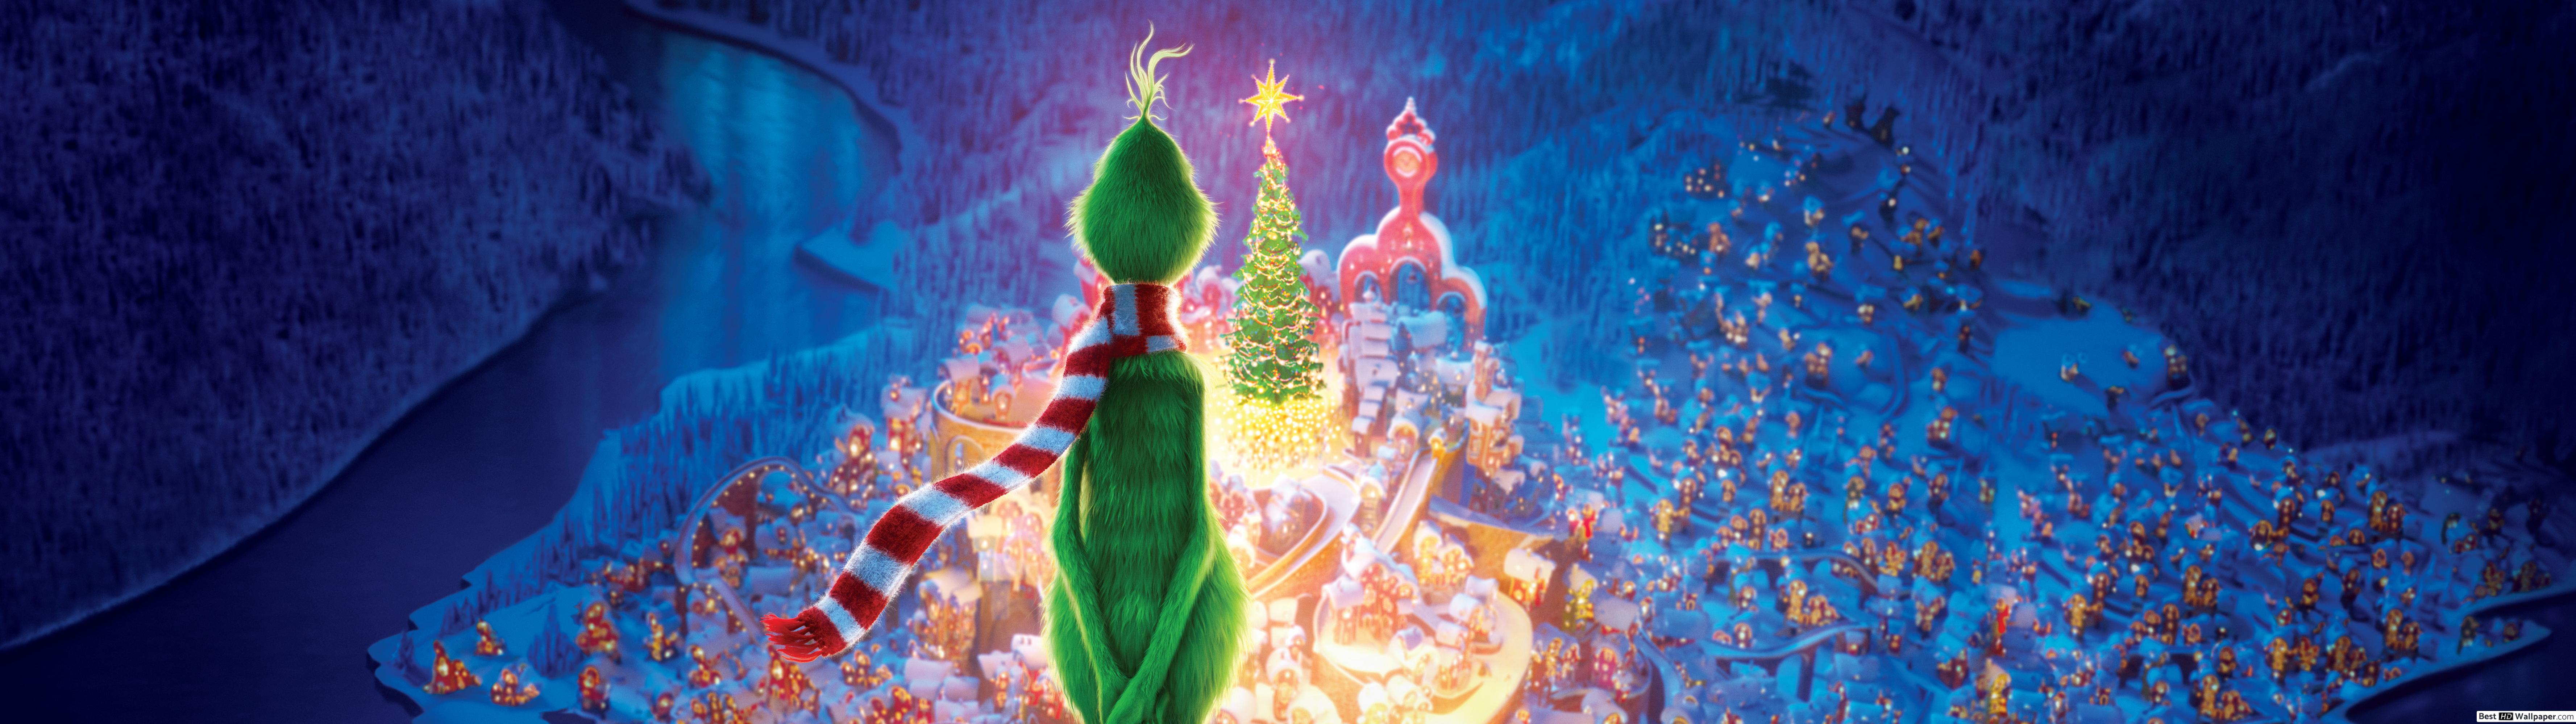 Mr. Grinch and Max celebrating Christmas HD wallpaper download